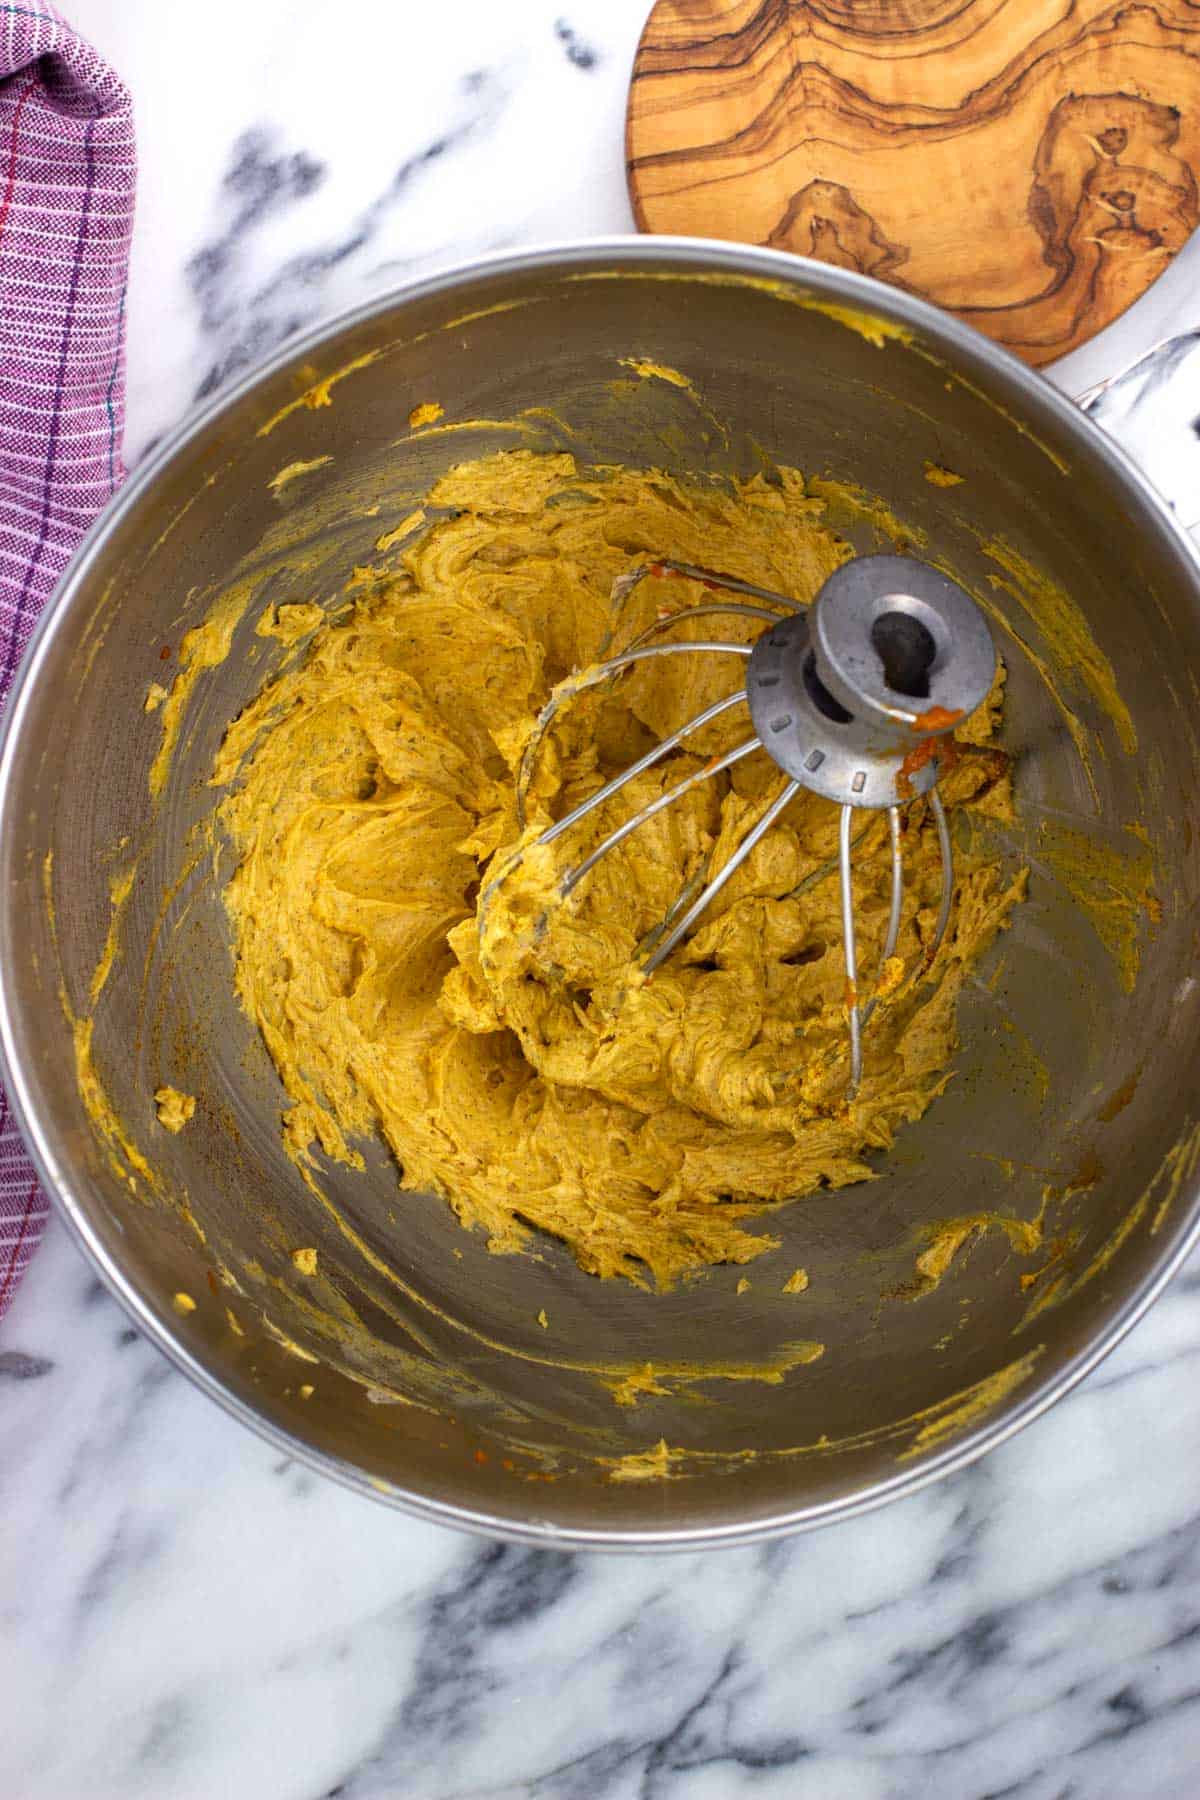 Pumpkin spice butter whipped in the bowl of a food processor.